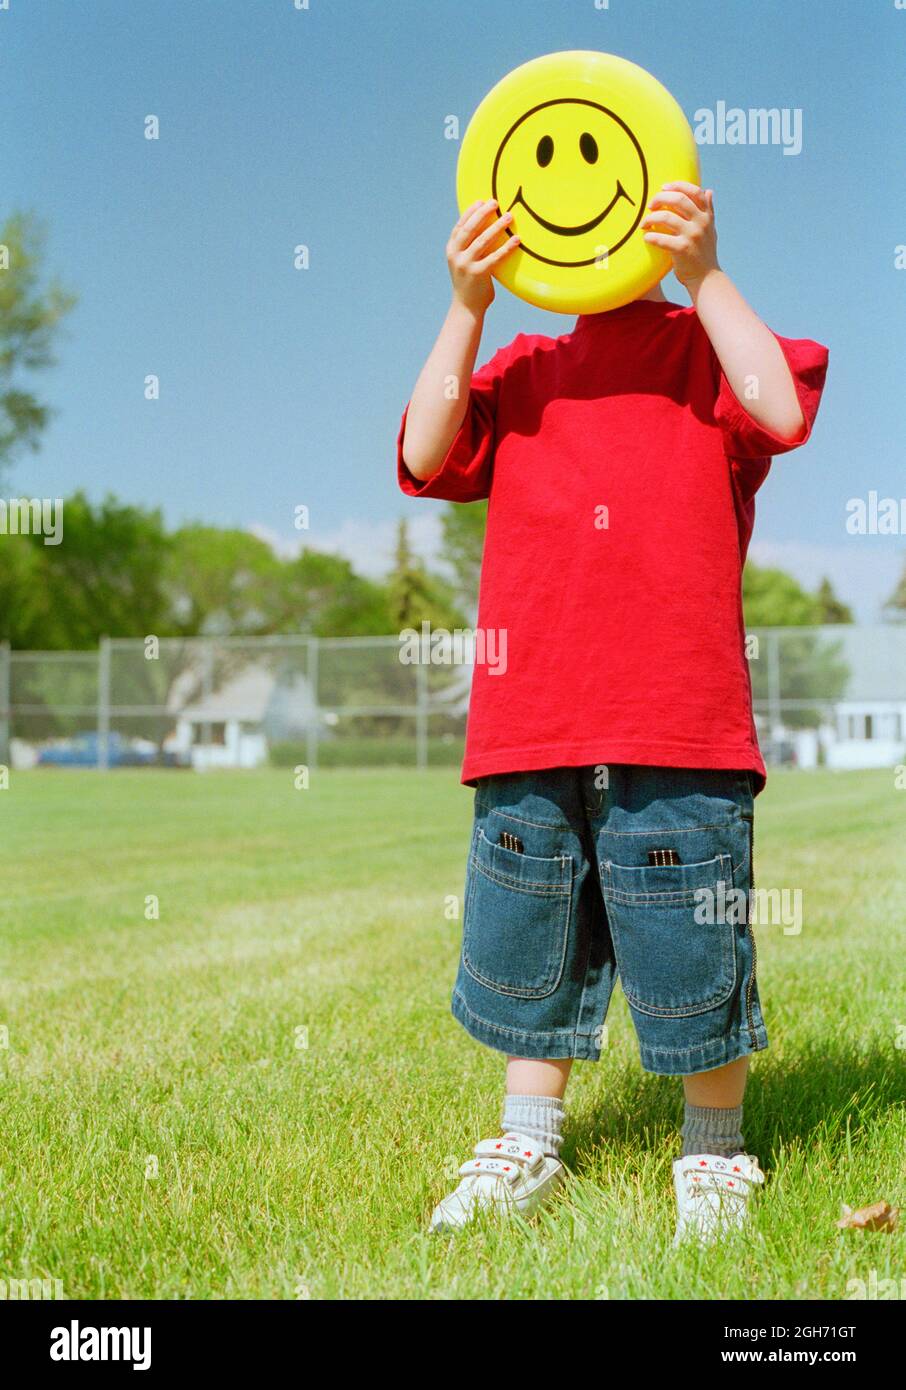 Small child with happy yellow frisbee in park setting. Stock Photo